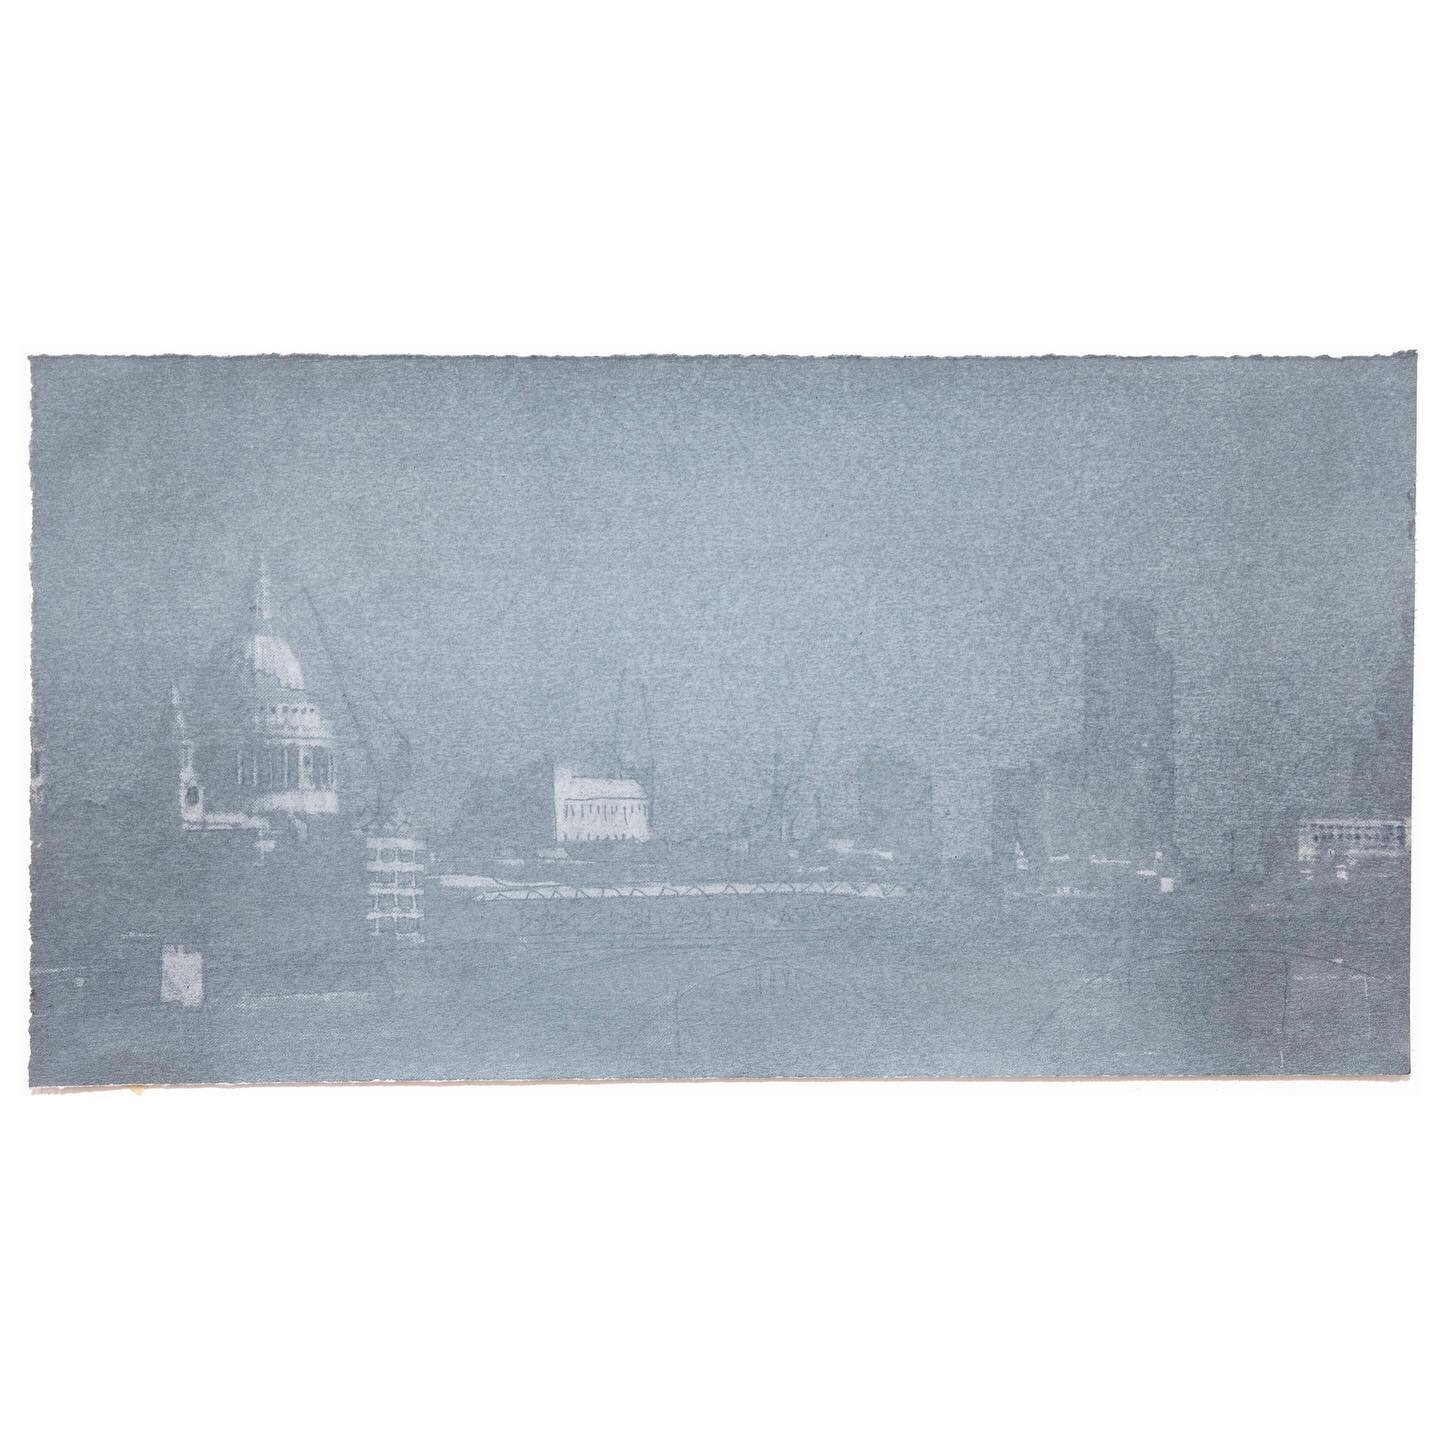 St Paul&rsquo;s 
19x30cm 
Screenprint on graphite 

This was one of the first prints I made from the dusk series back in2016- and one of my favourites:)
Now available in @eamesfineart **SUMMER SECRET AUCTION**
Along with another 170 original artworks